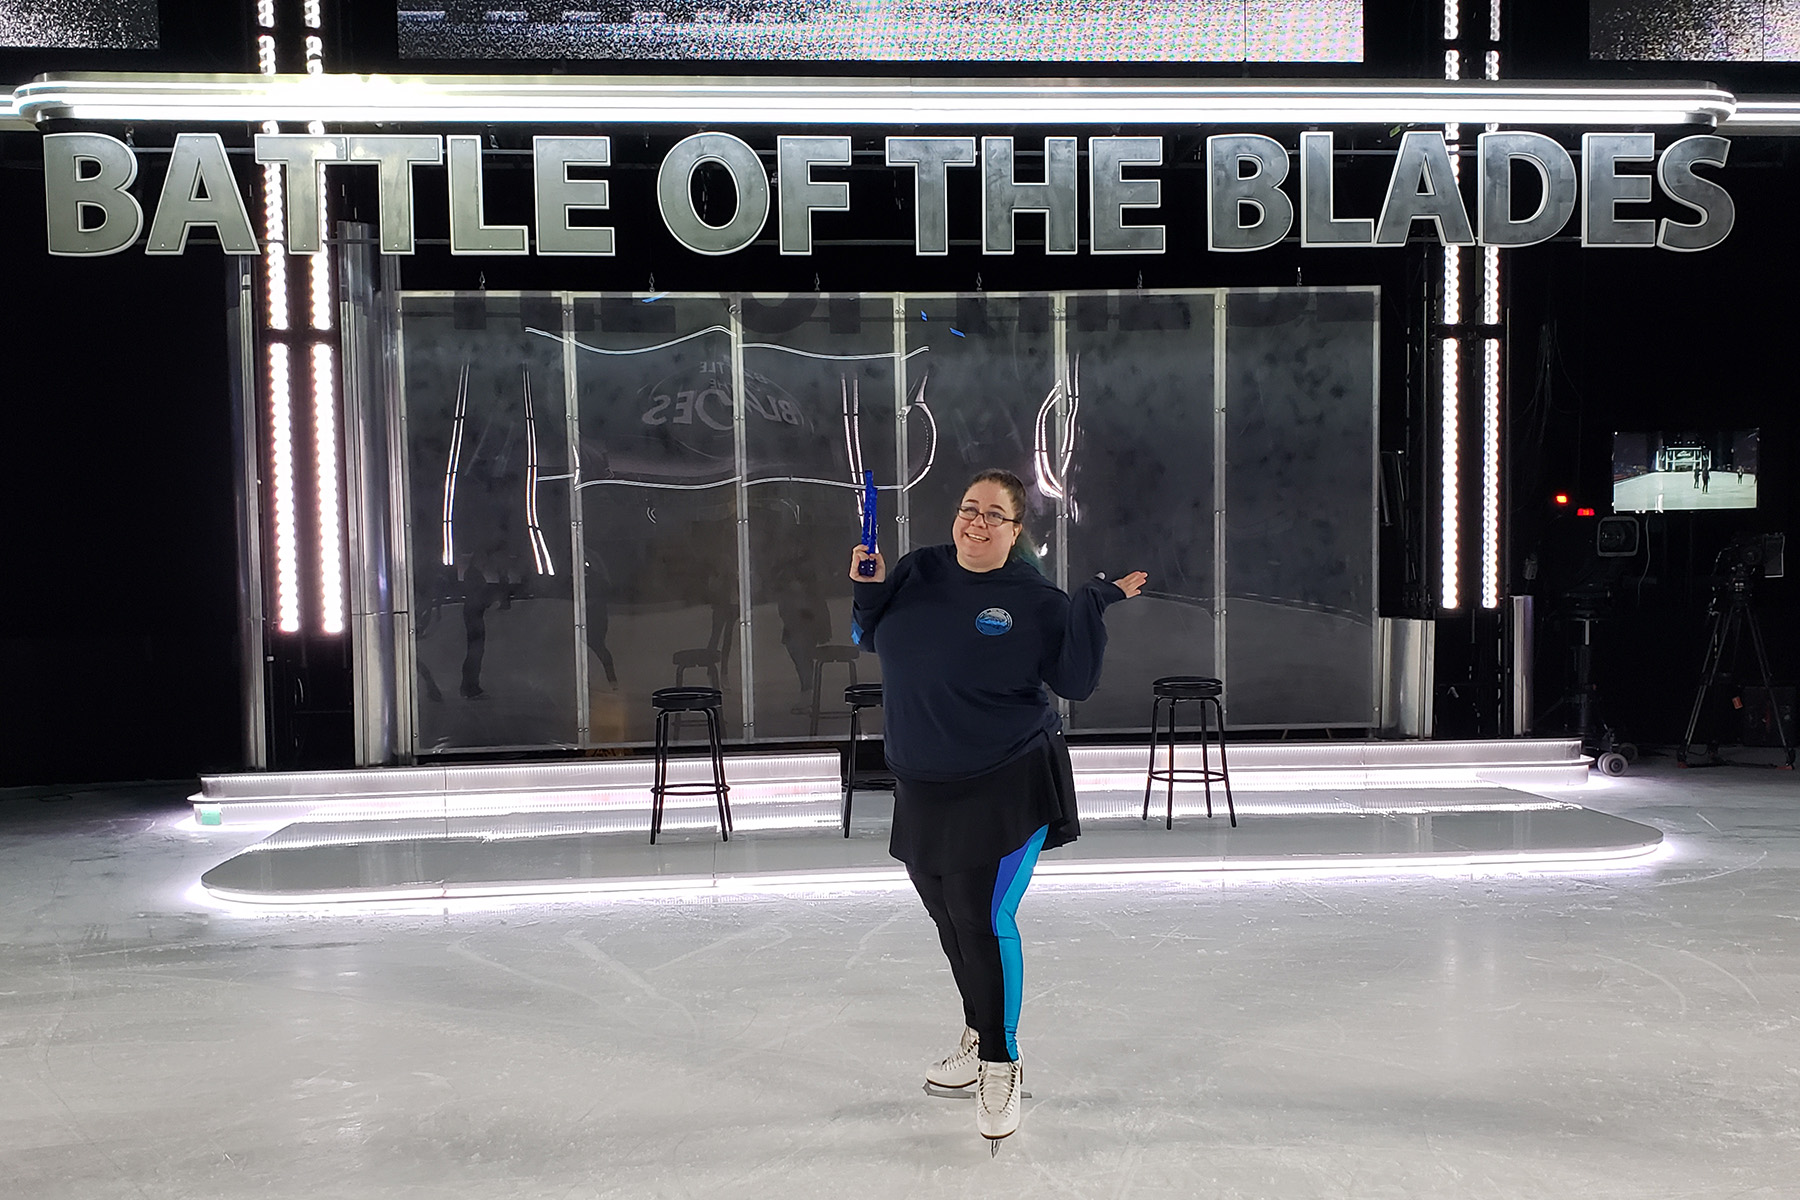 A large middle aged figure skater in front of the Battle of the Blades backdrop.